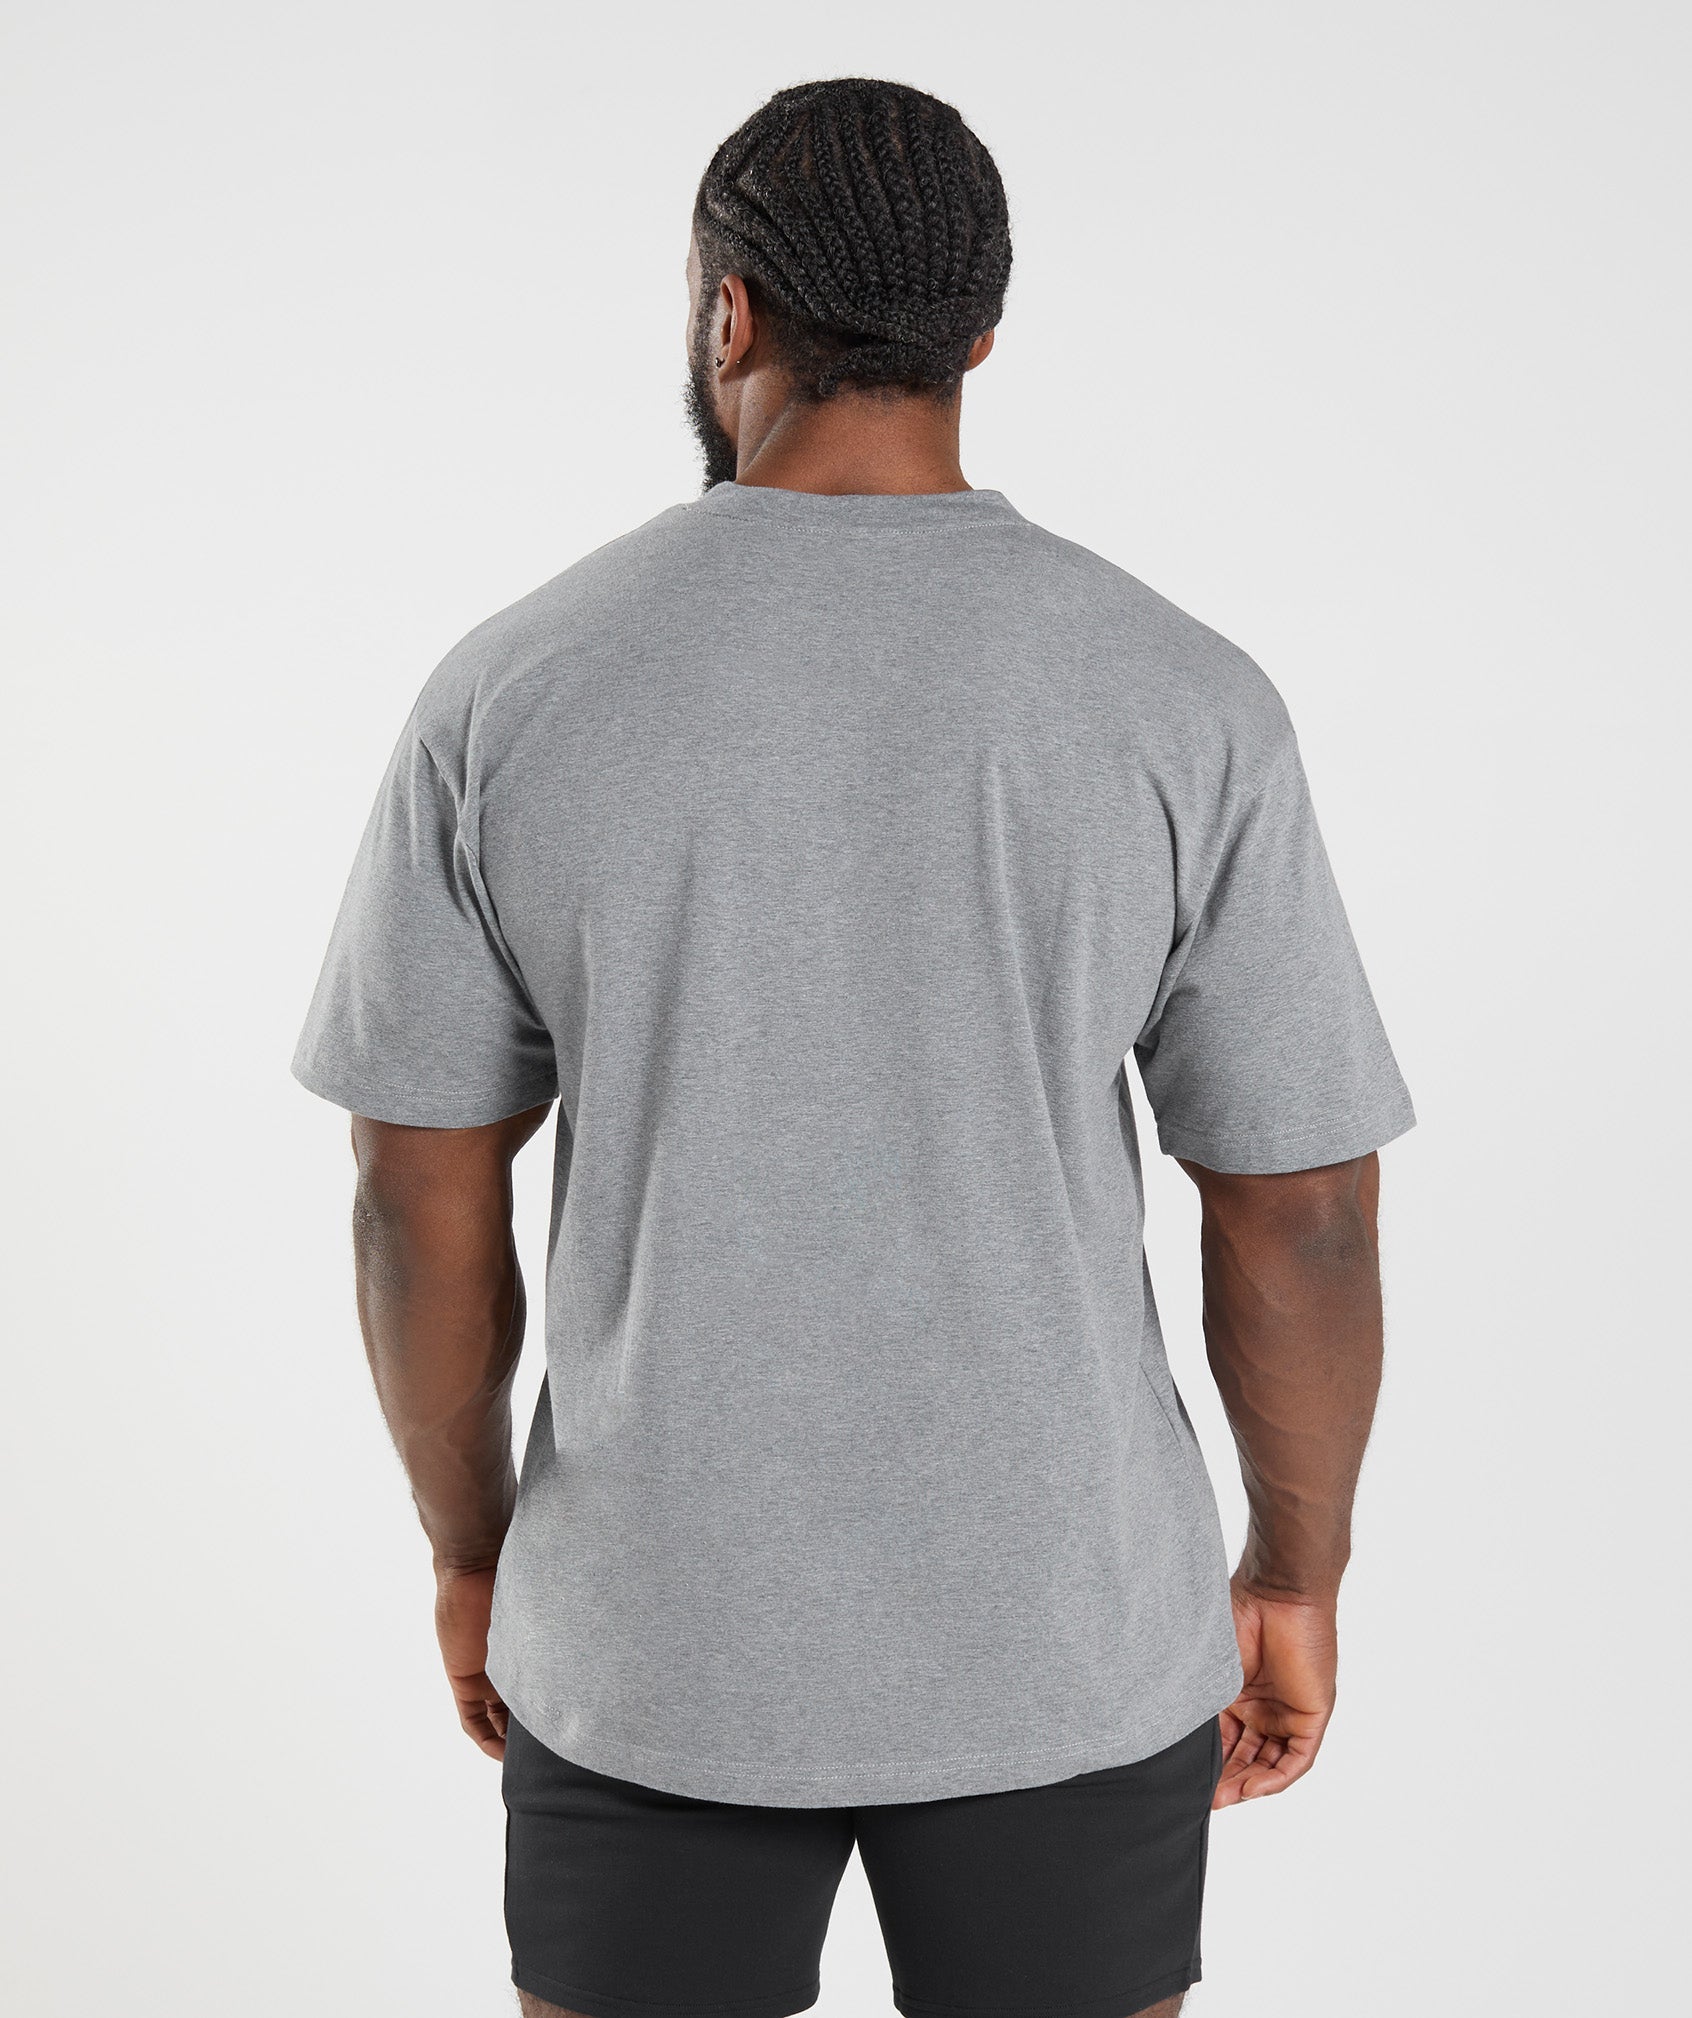 Essential Oversized T-Shirt in Charcoal Marl - view 2